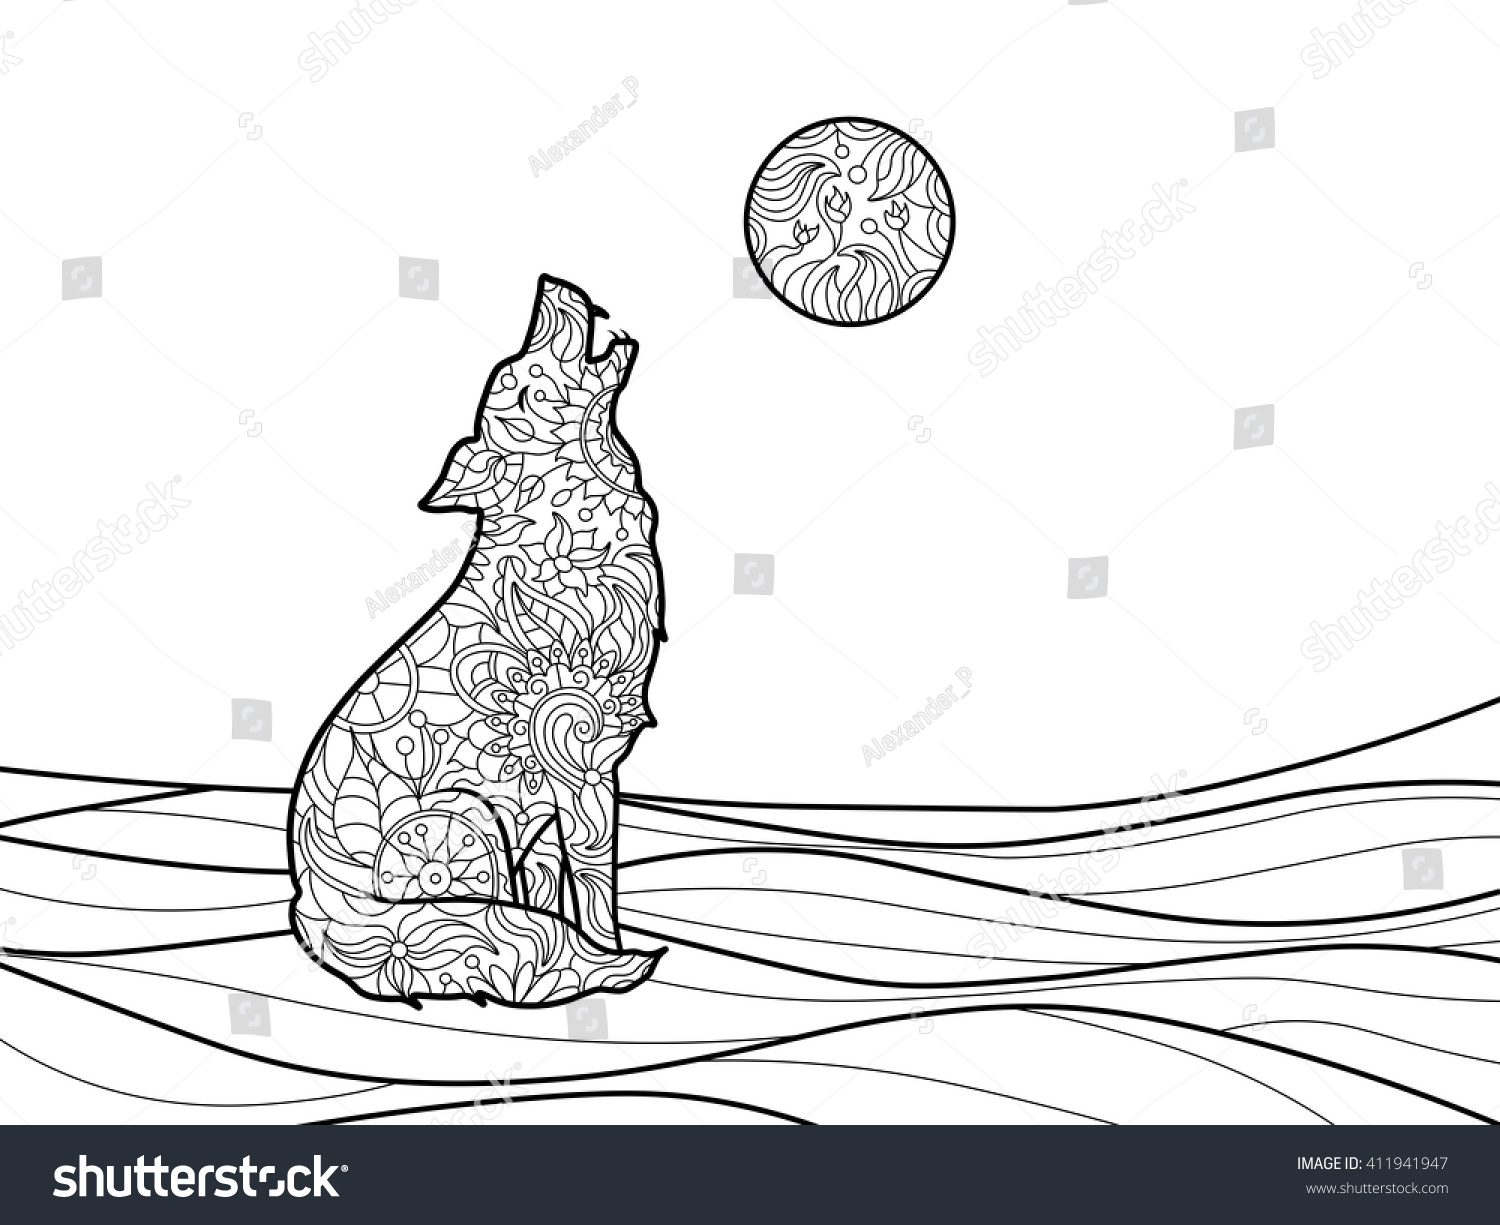 SVG of Wolf coloring book for adults vector illustration. Zentangle style. Black and white lines. Lace pattern svg